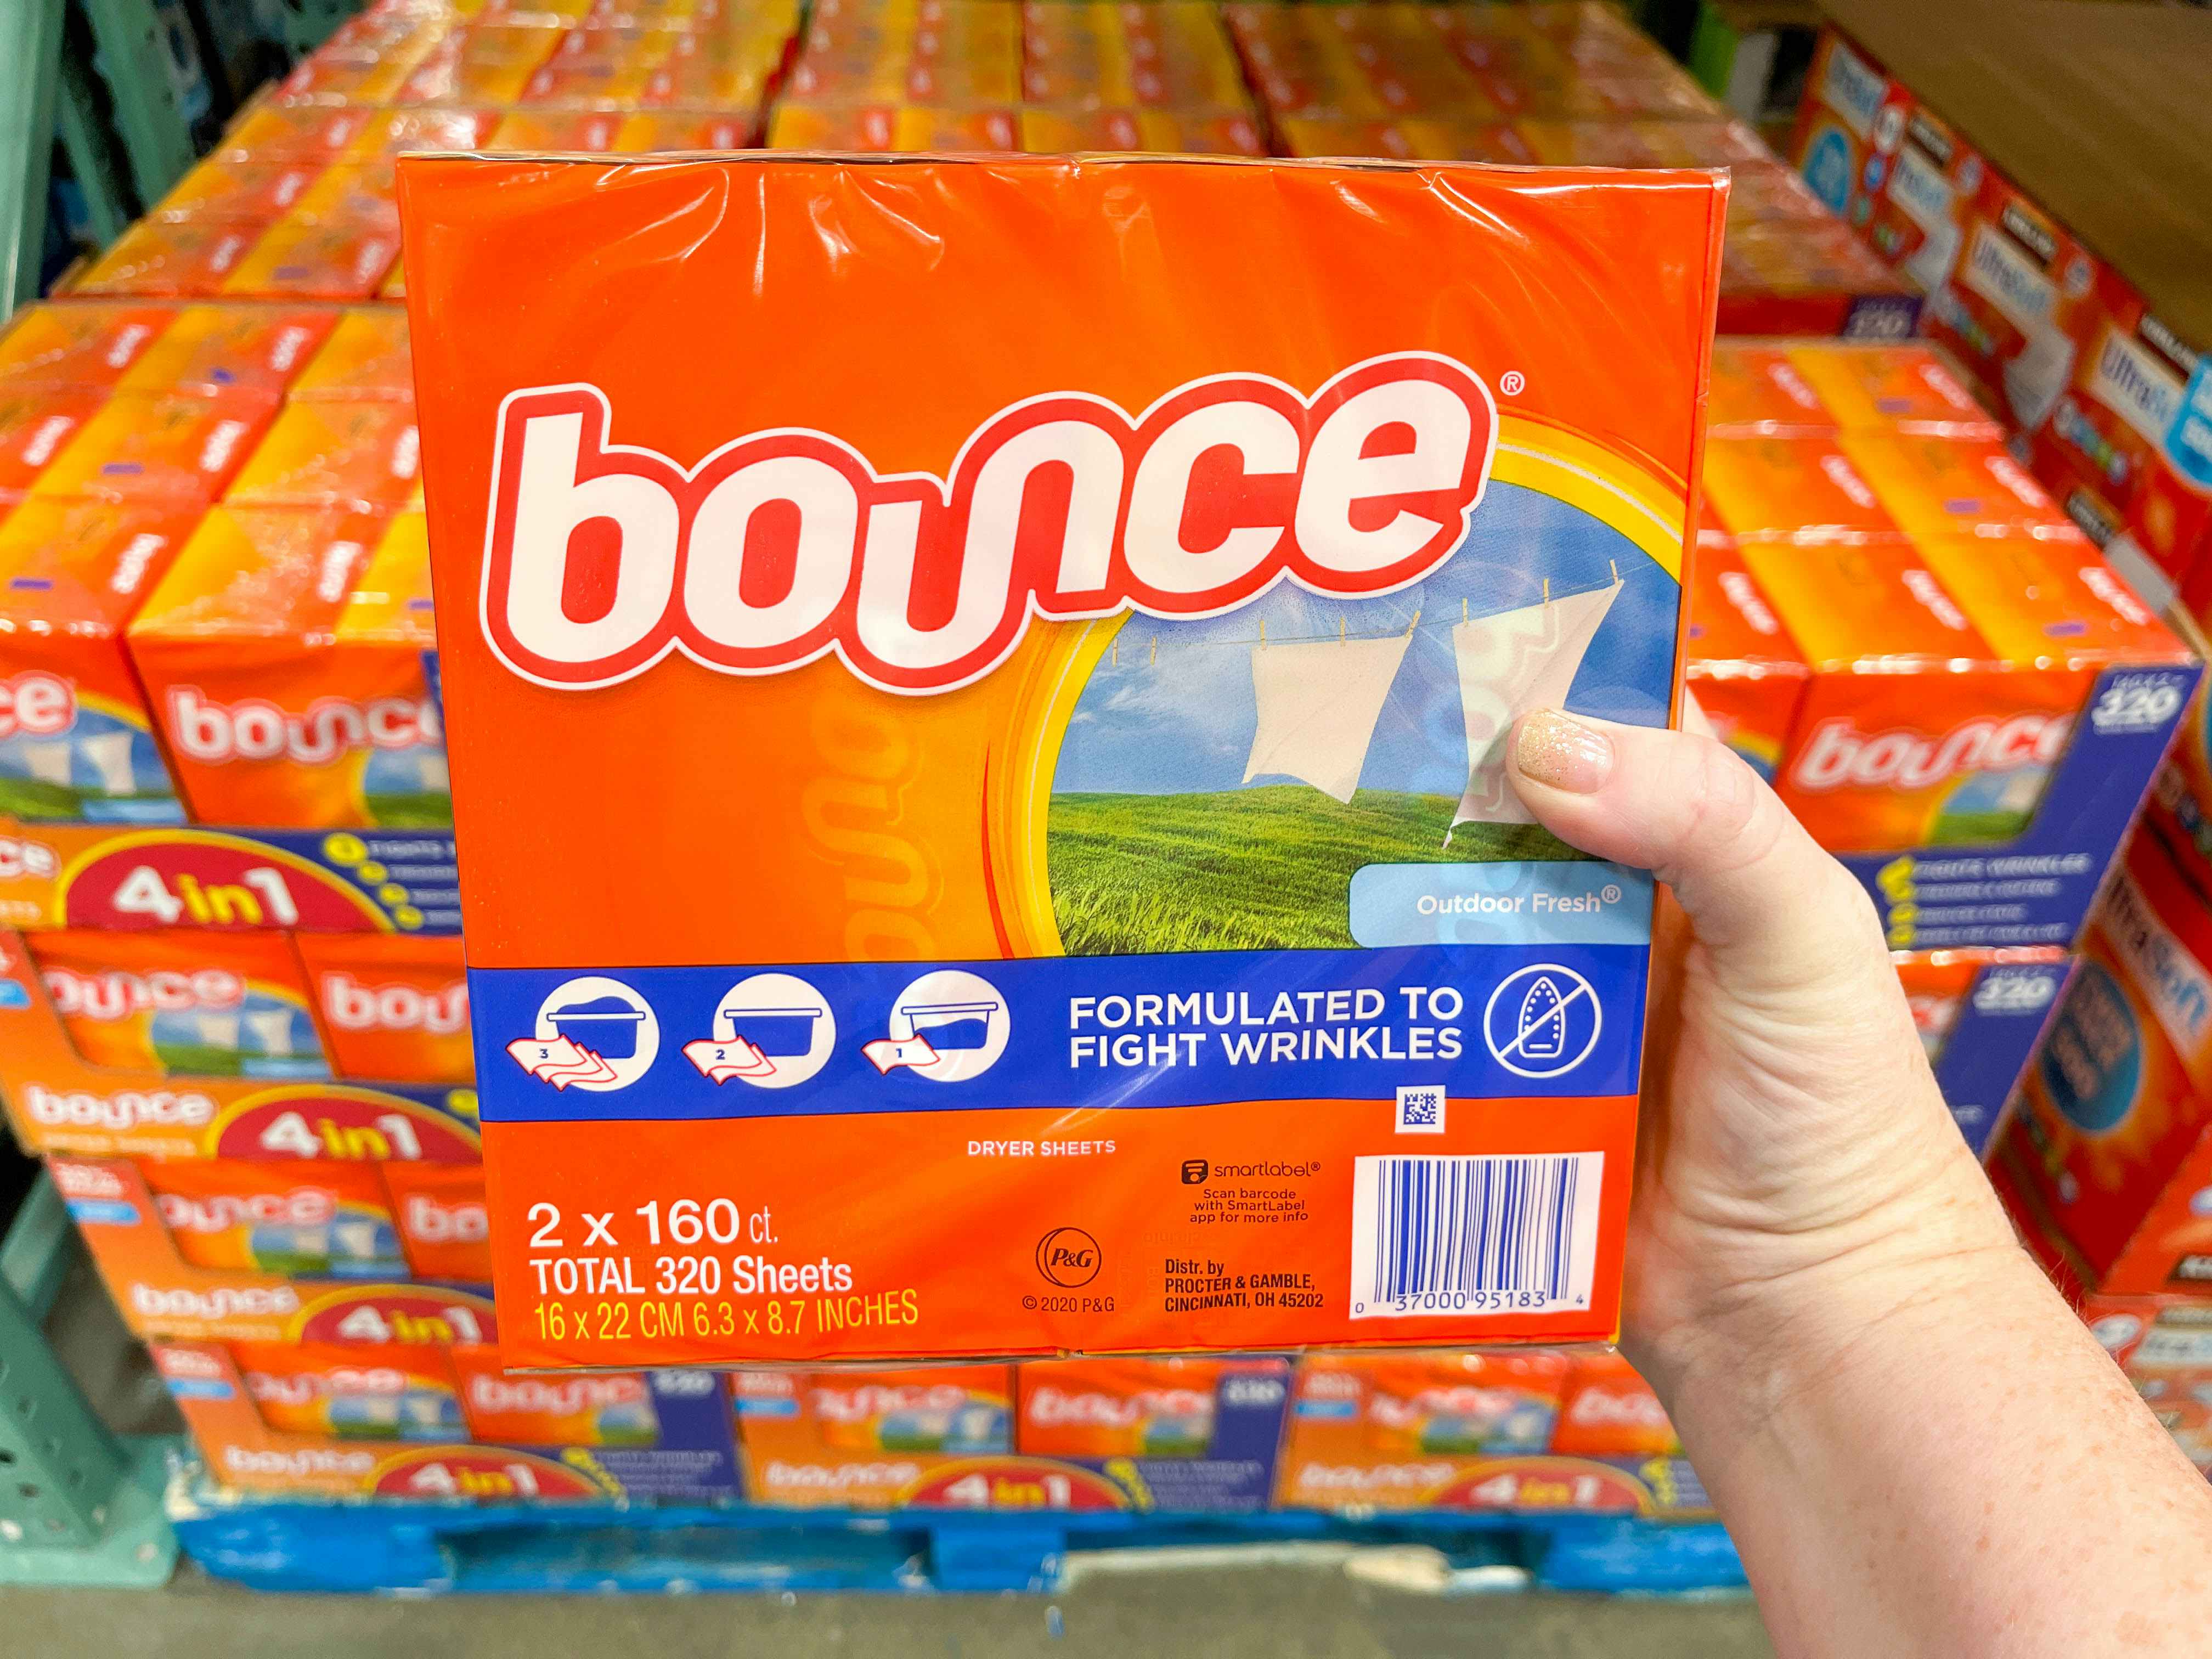 a package of bounce fabric pads being held in store